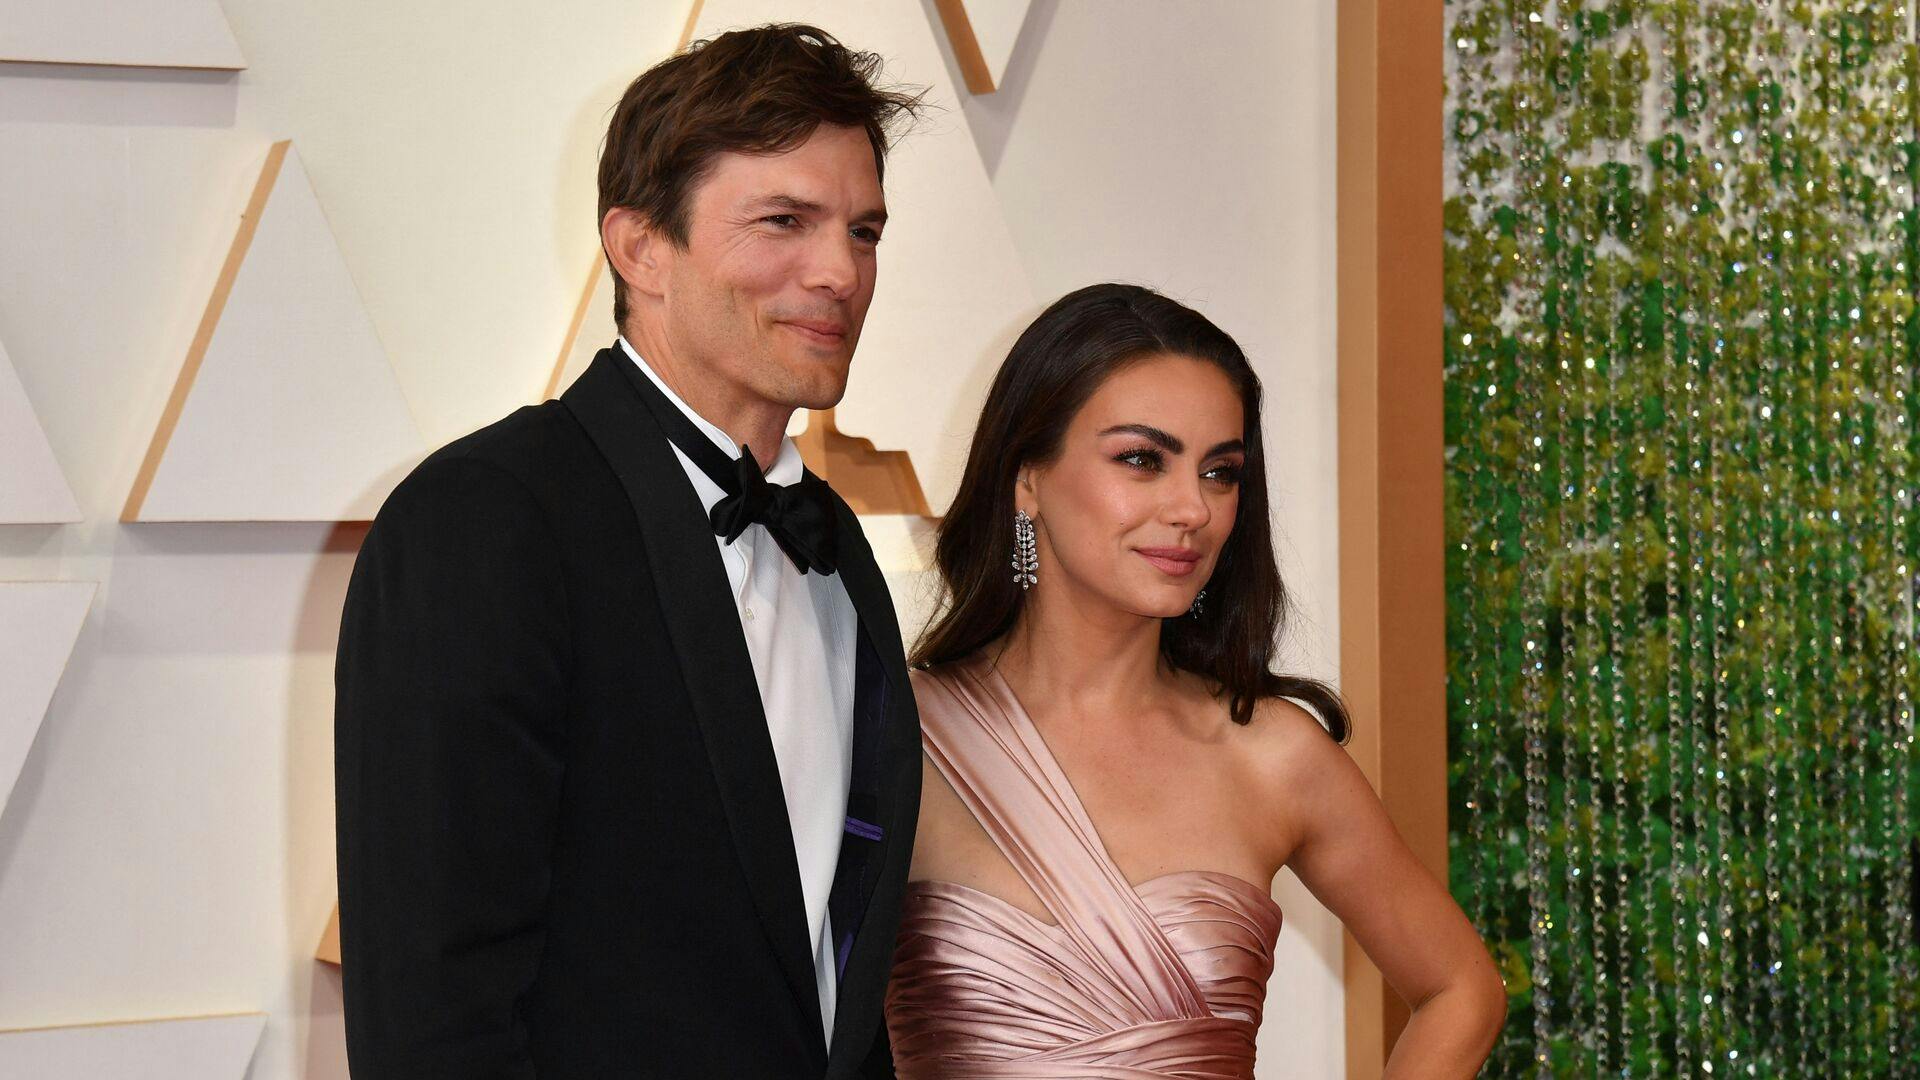 US actor Ashton Kutcher (L) and wife US actress Mila Kunis attend the 94th Oscars at the Dolby Theatre in Hollywood, California on March 27, 2022. (Photo by ANGELA WEISS / AFP)